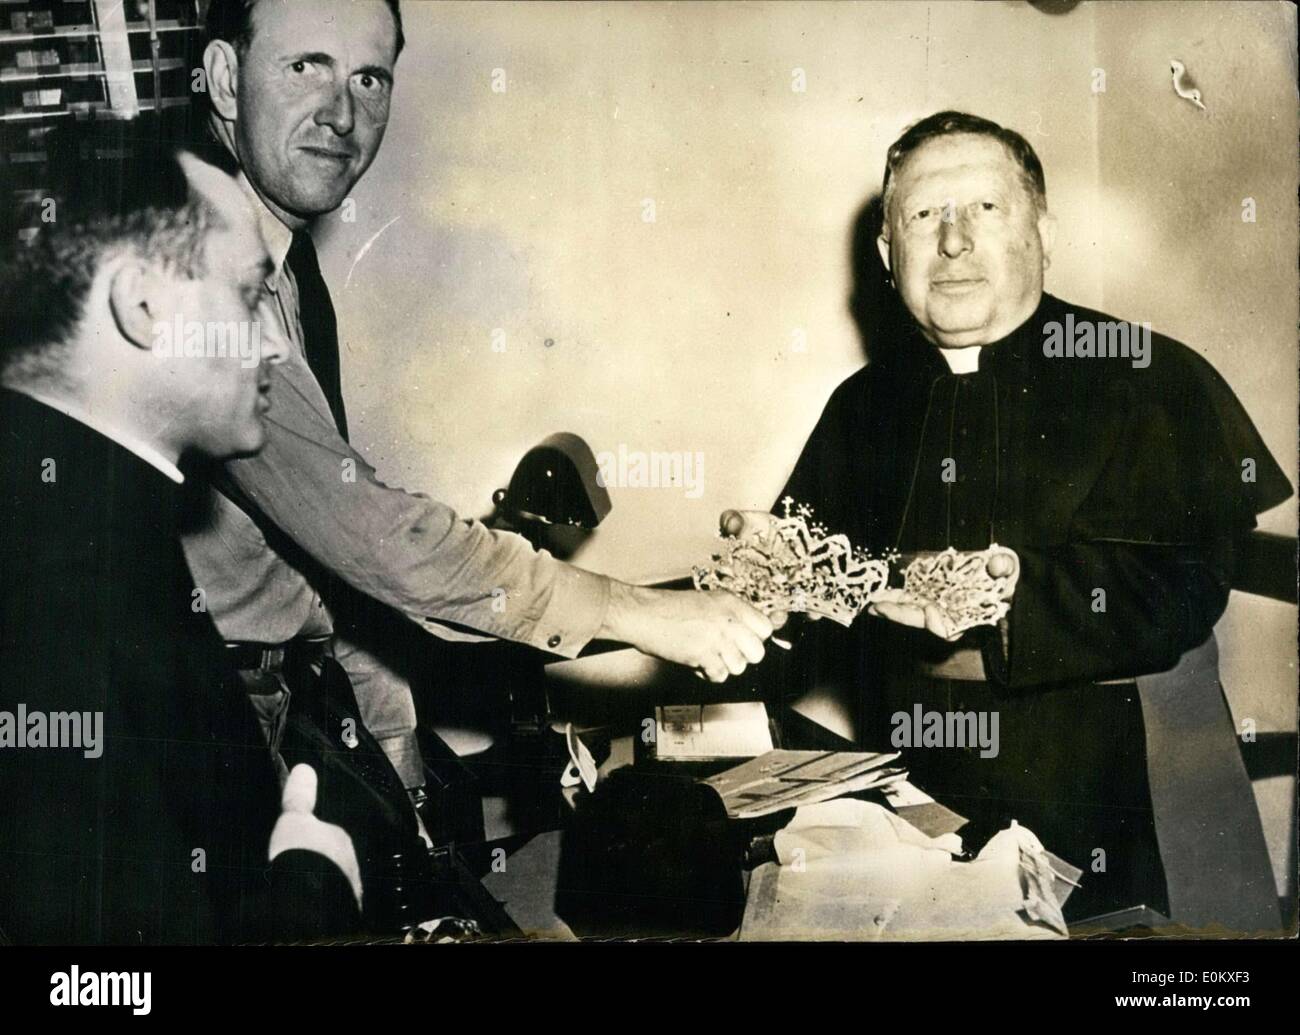 Jun. 14, 1952 - Pastor Angelo R. Cioffi(pictured right) was the leader of the ''Regina Pacie'' church in New York. The church itself had a shrine in which two crowns studded with diamonds and rubies were laid, valued at over 00,000. He had to follow his own sermon when the crowns ended up getting stolen. A week after the theft, though, a mysterious package showed up at the pastor's house. Inside the package were the stolen crowns. A 1 1/2 carat diamond and 19 small jewels were taken from the two crowns Stock Photo